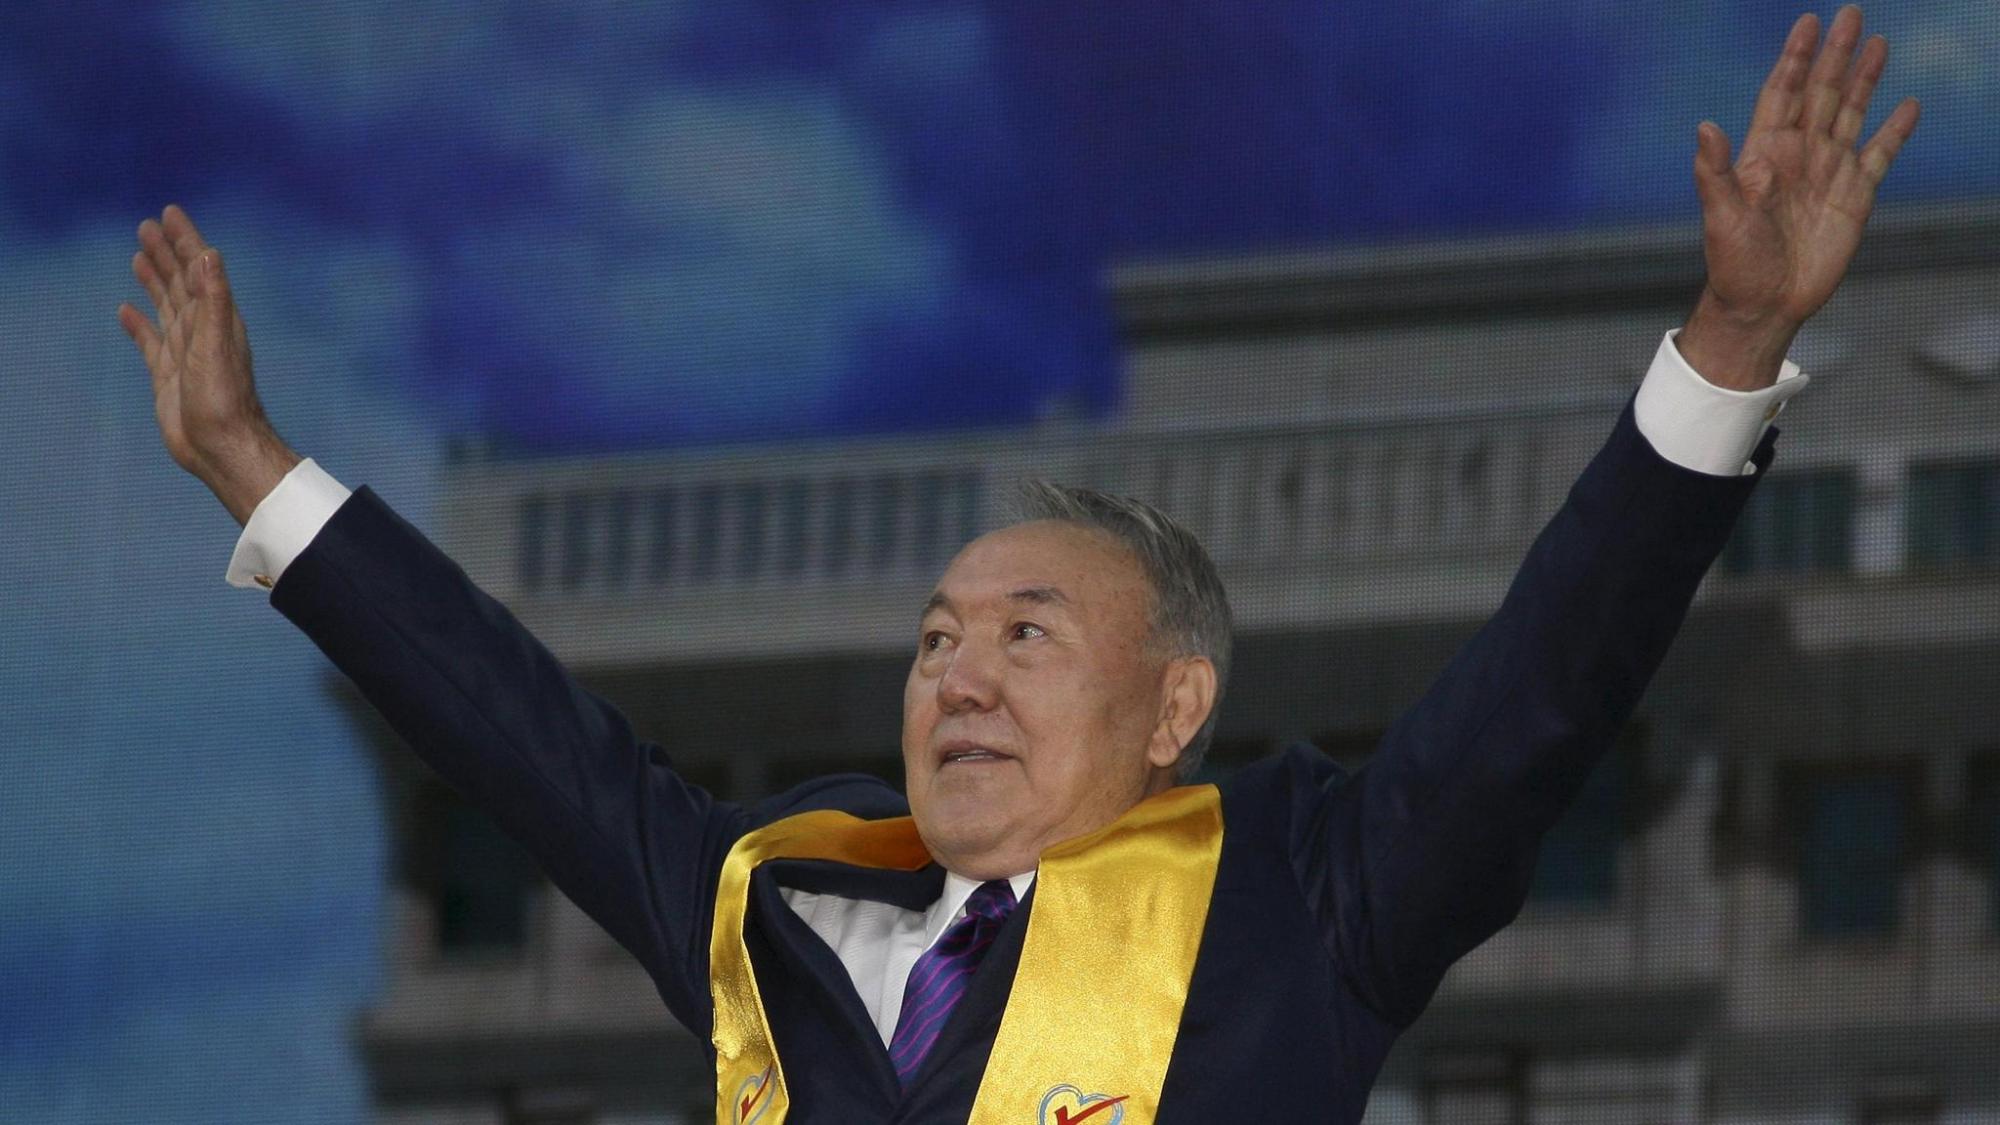 Kazakhstan's leader resigns after almost 30 years in power